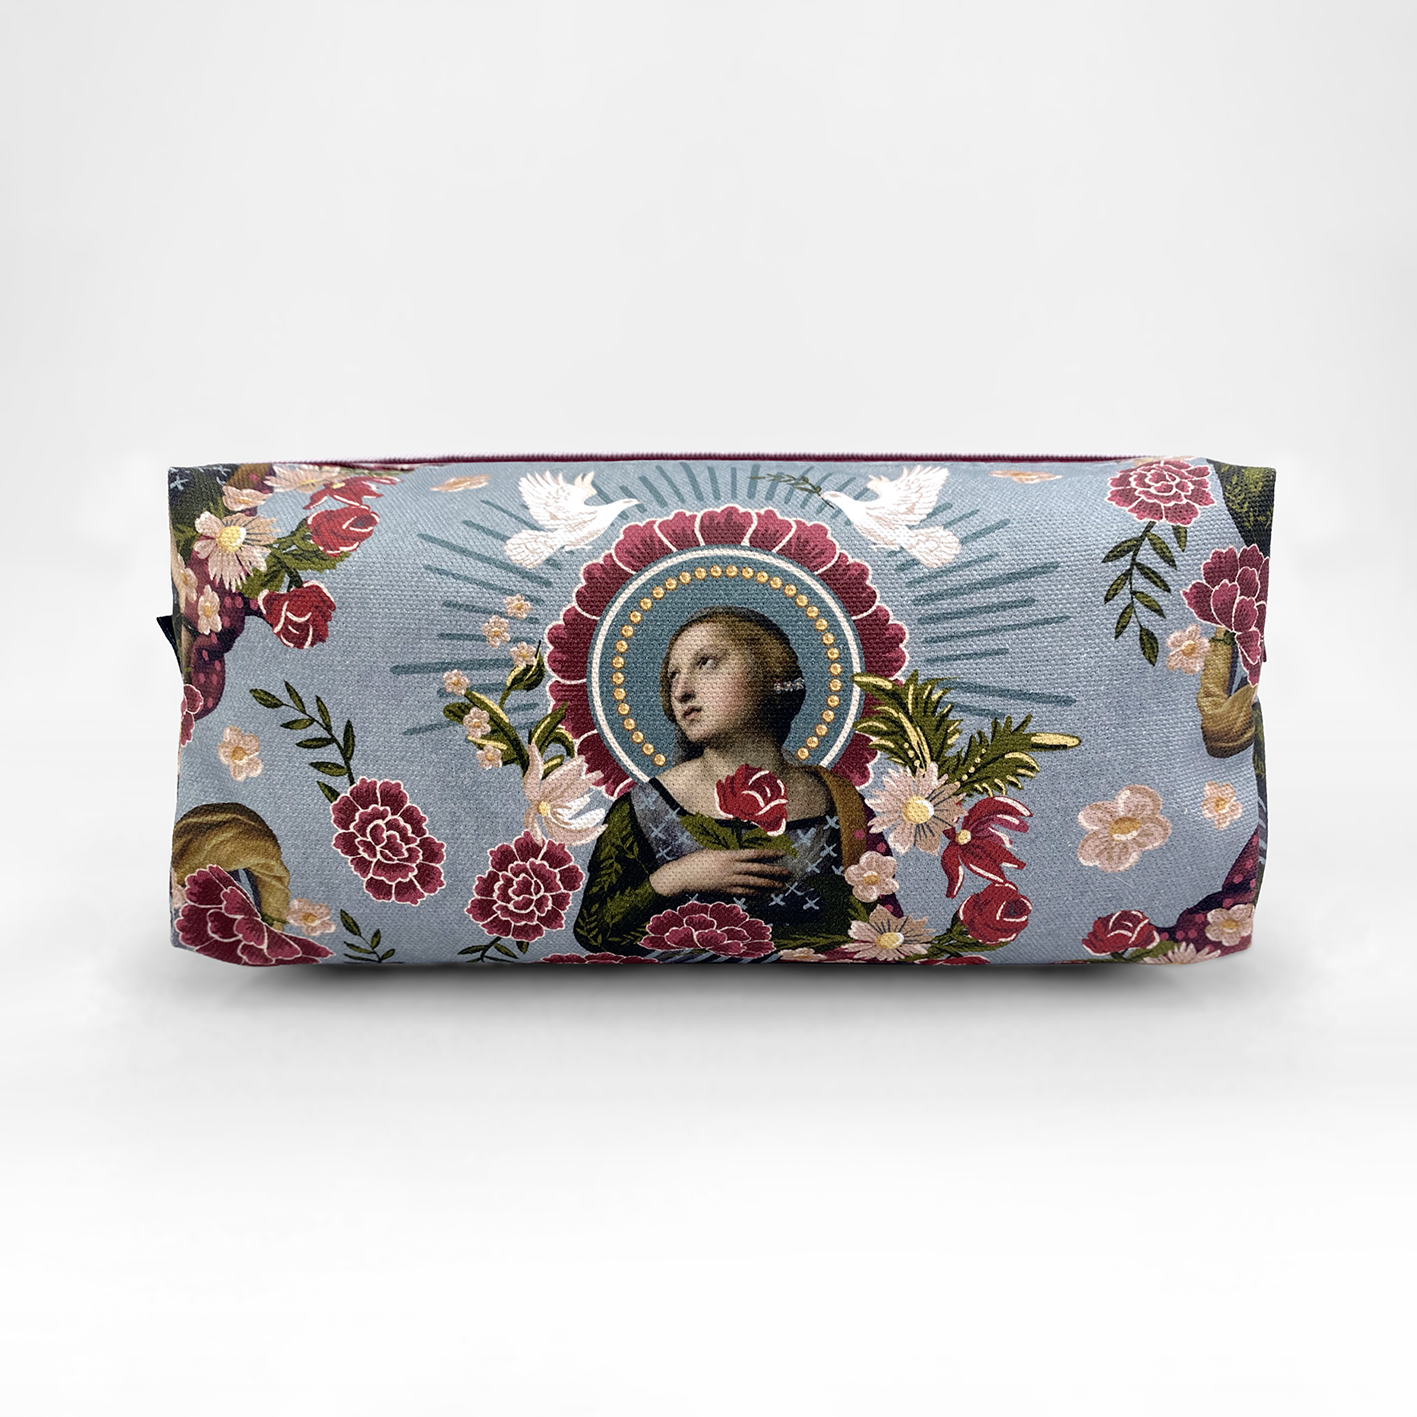 Bespoke colourful print and custom printed textile accessories and merchandise for The National Gallery in London by Paul Bristow Associates and made in the UK